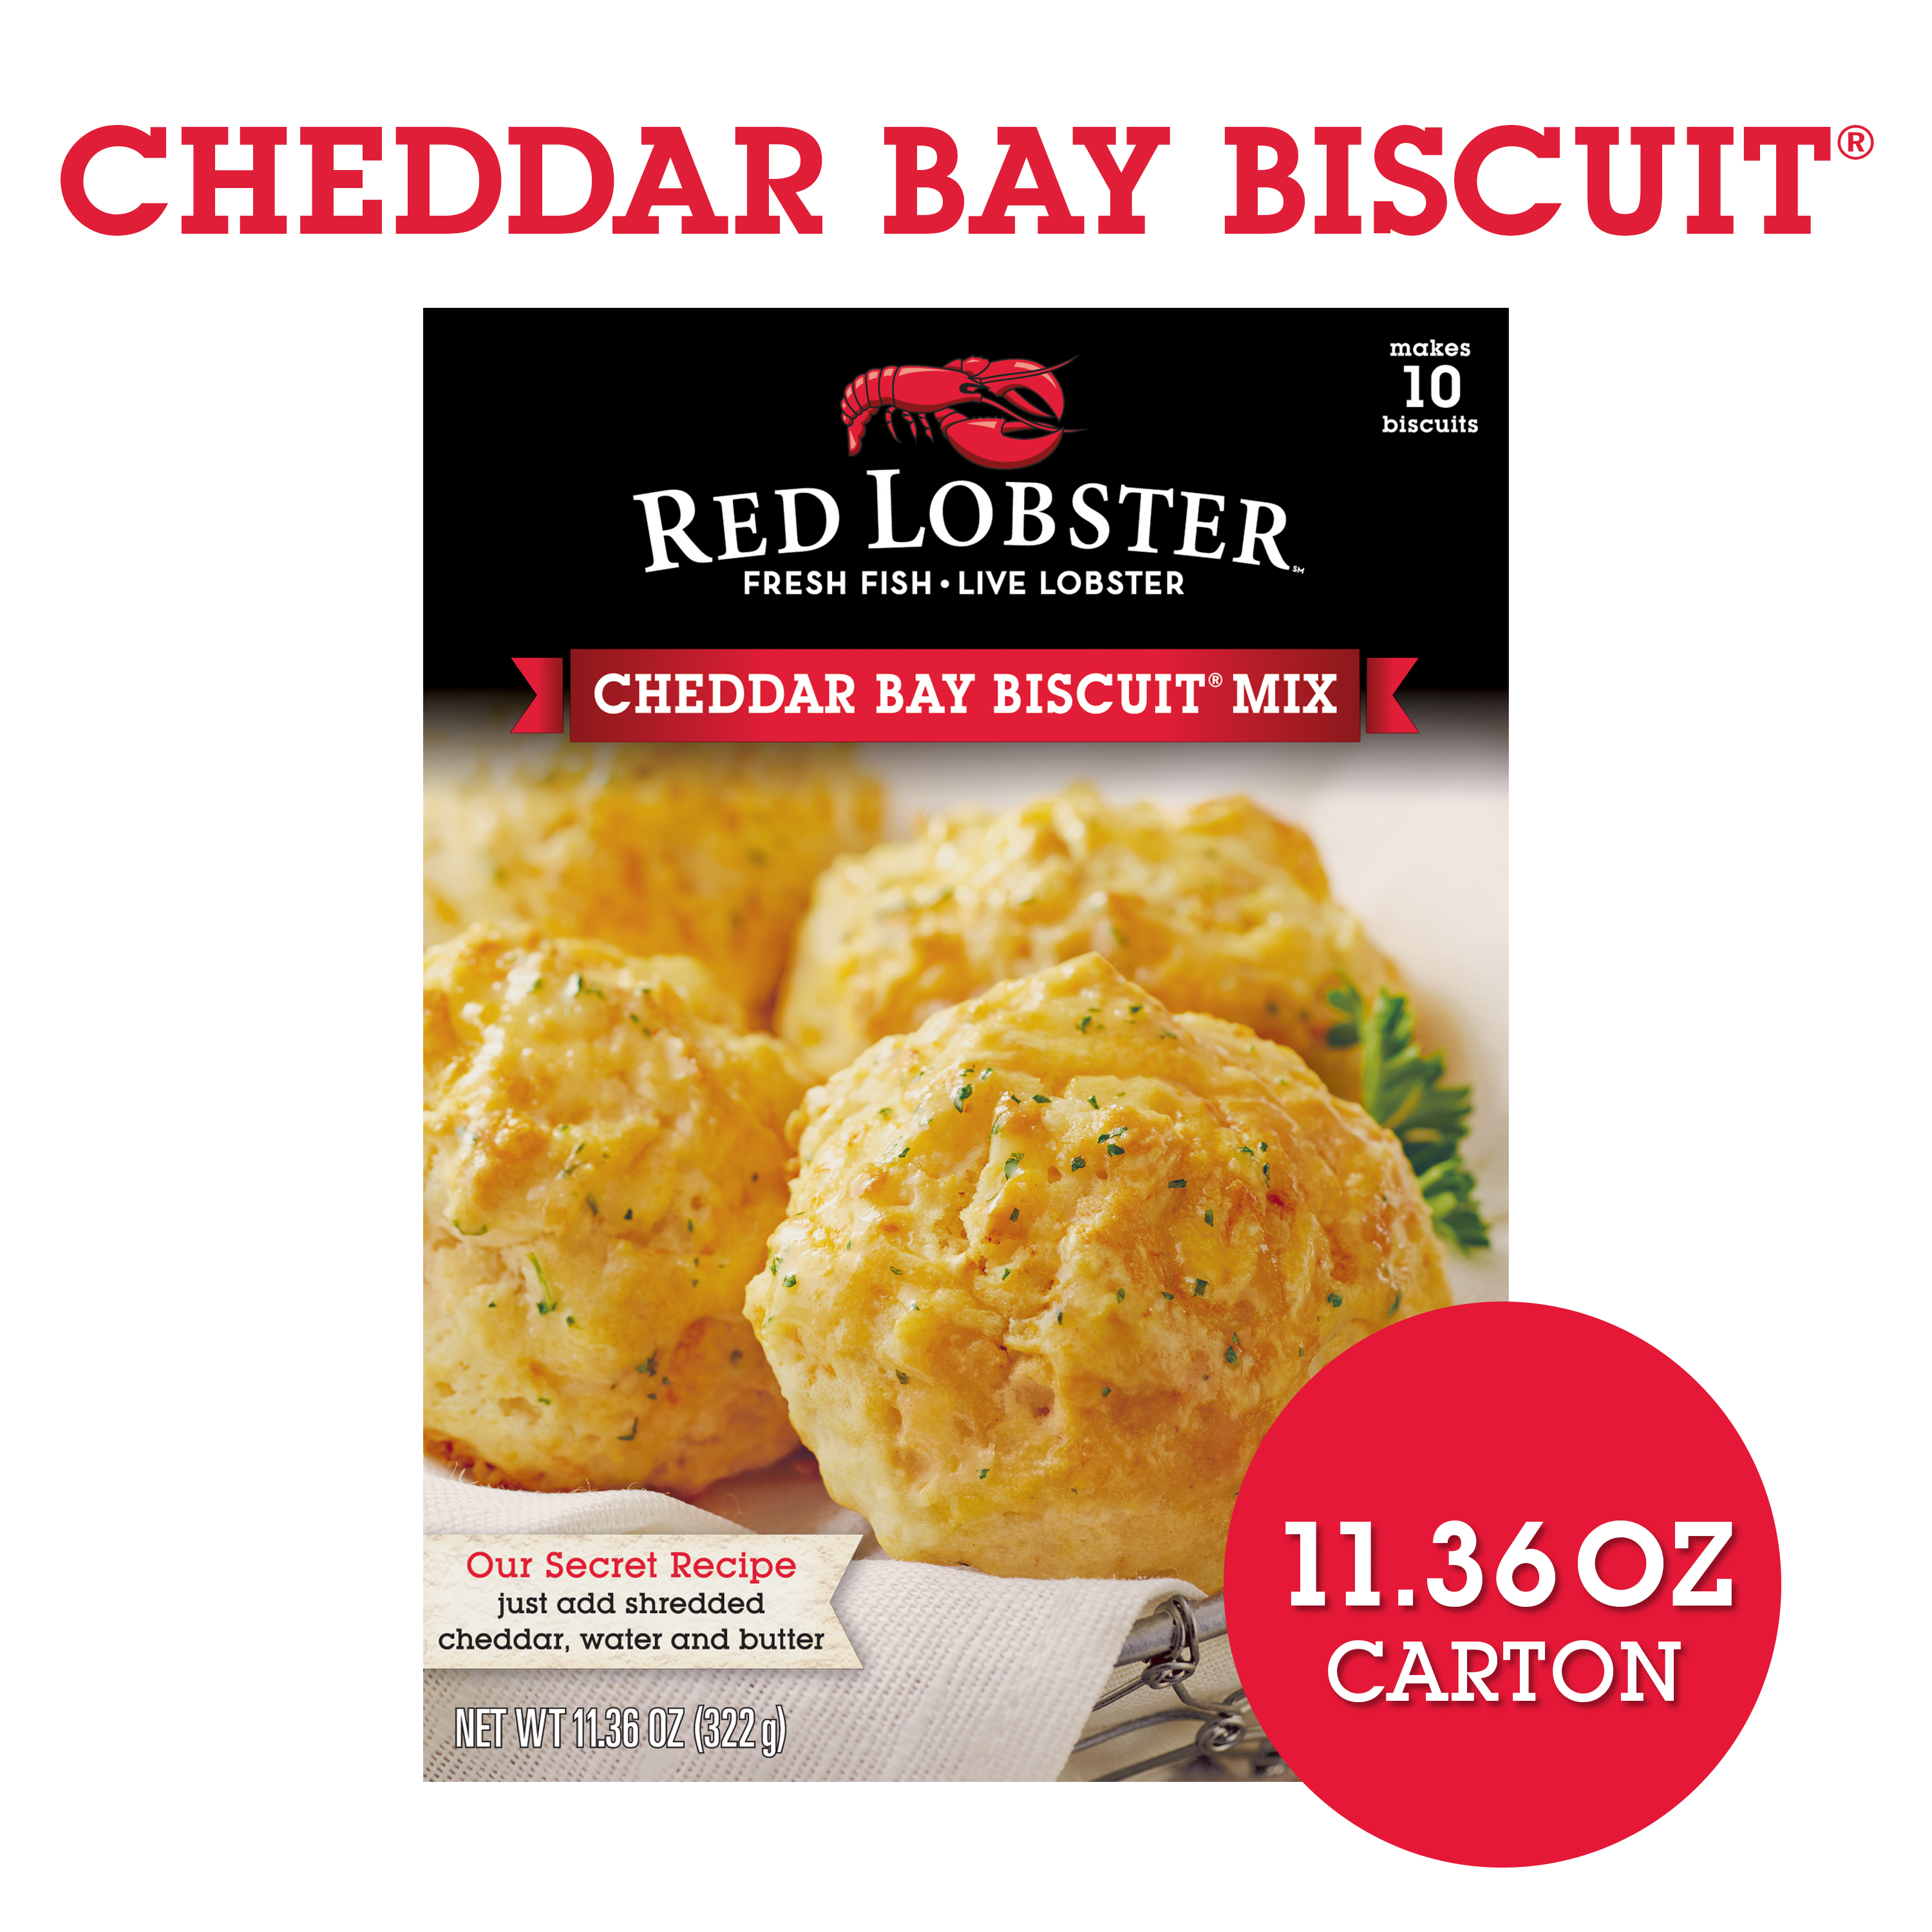 Red Lobster Cheddar Bay Biscuit Mix, Makes 10 Biscuits, 11.36 oz Box - image 2 of 10